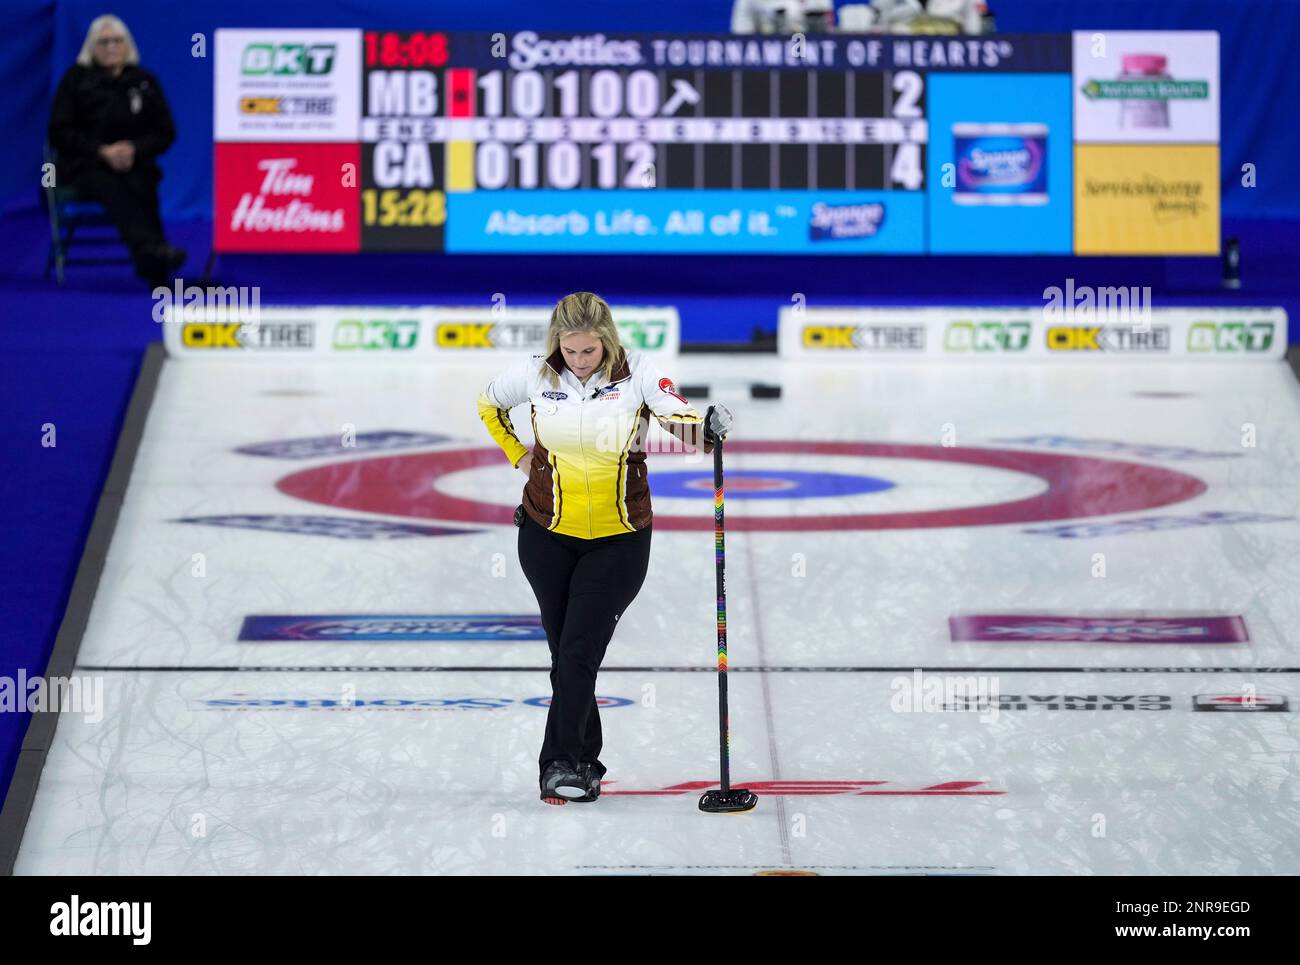 Manitoba skip Jennifer Jones reacts to her shot with last rock in the sixth end while playing Team Canada during the final at the Scotties Tournament of Hearts curling event, in Kamloops,